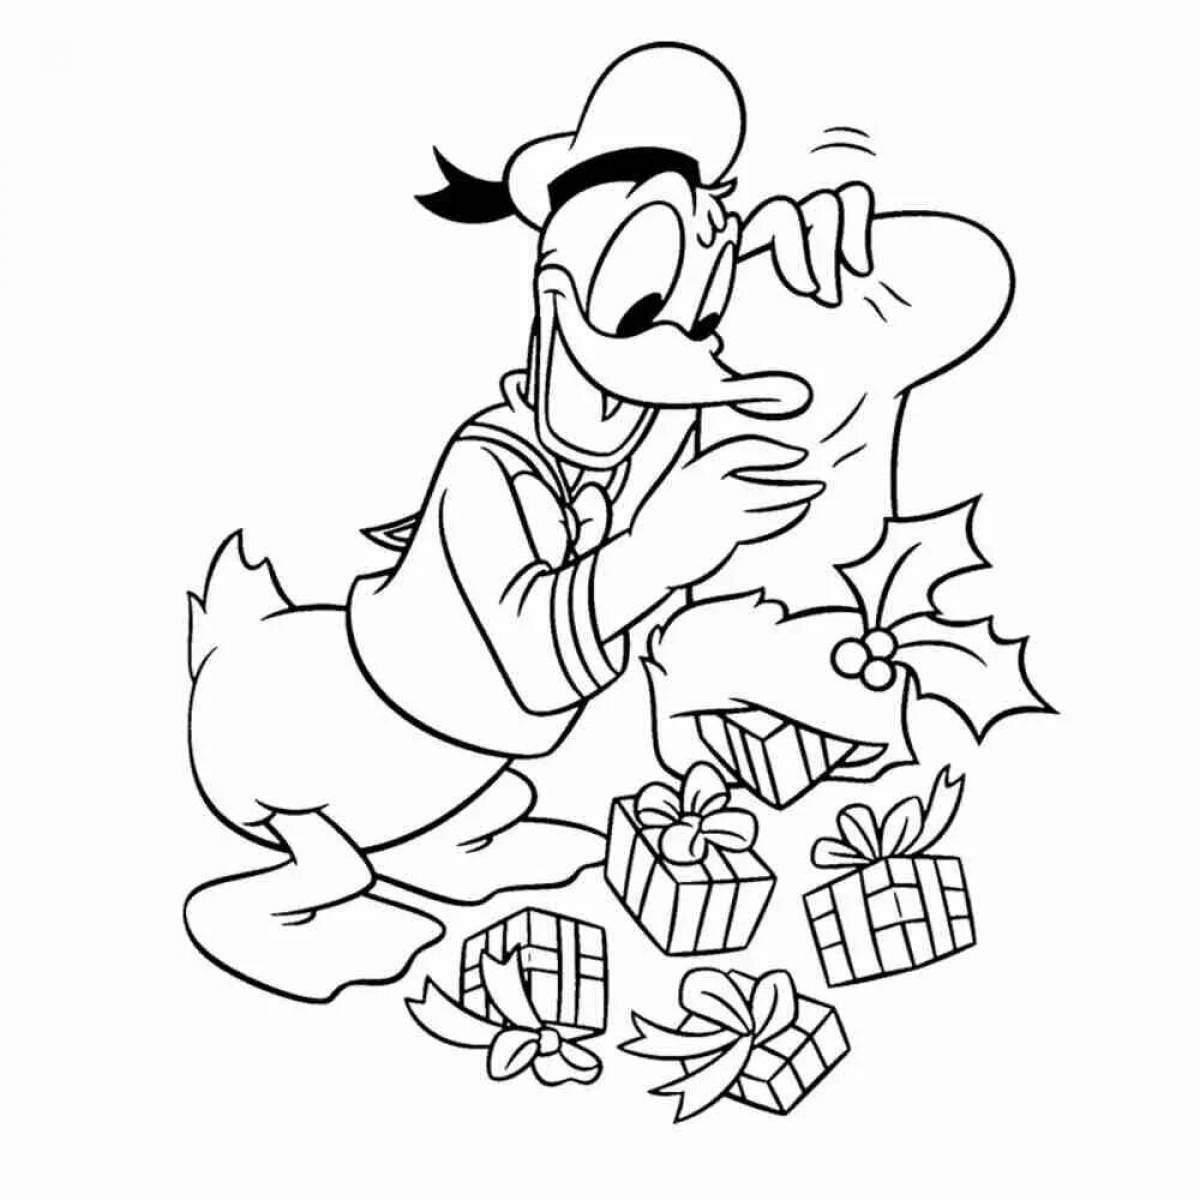 Coloring page magnanimous scrooge mcduck with money